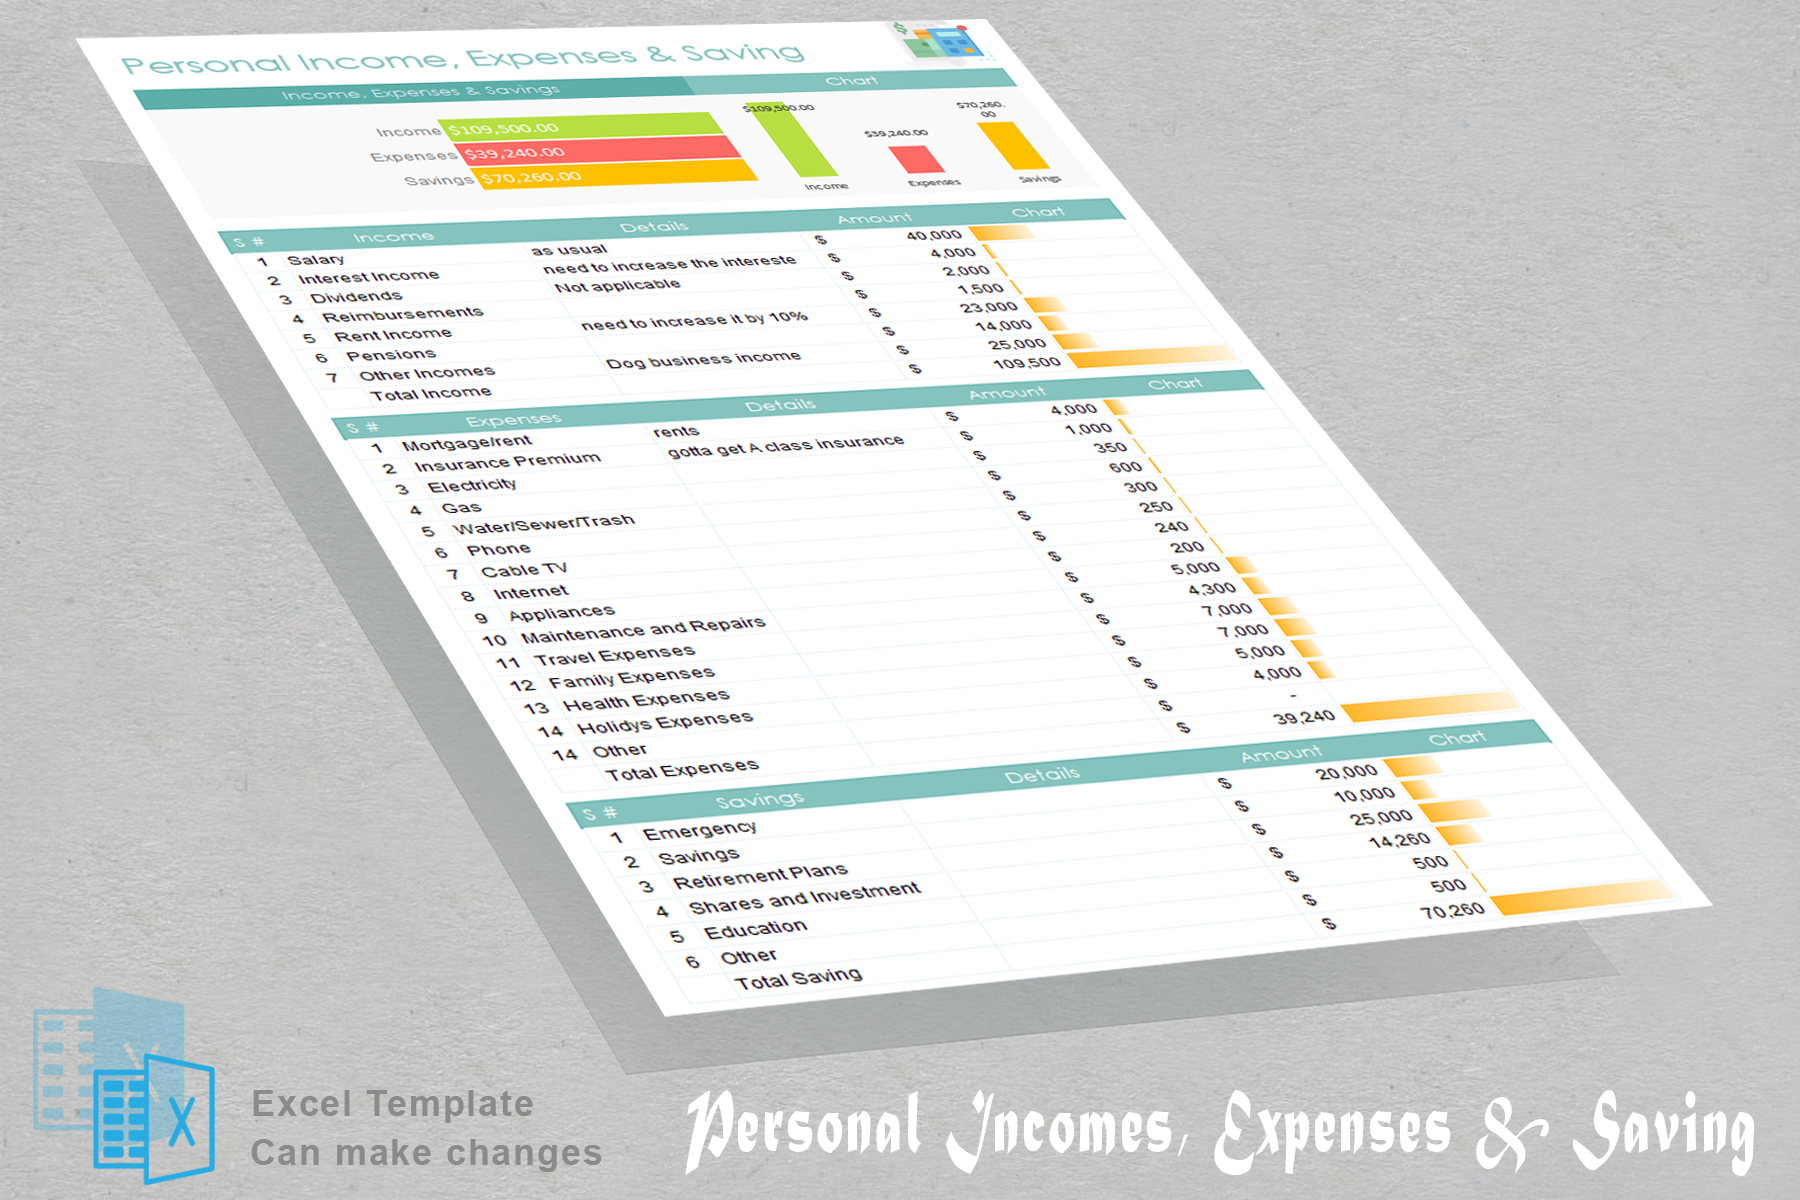 Personal Income, Expenses & Saving Template